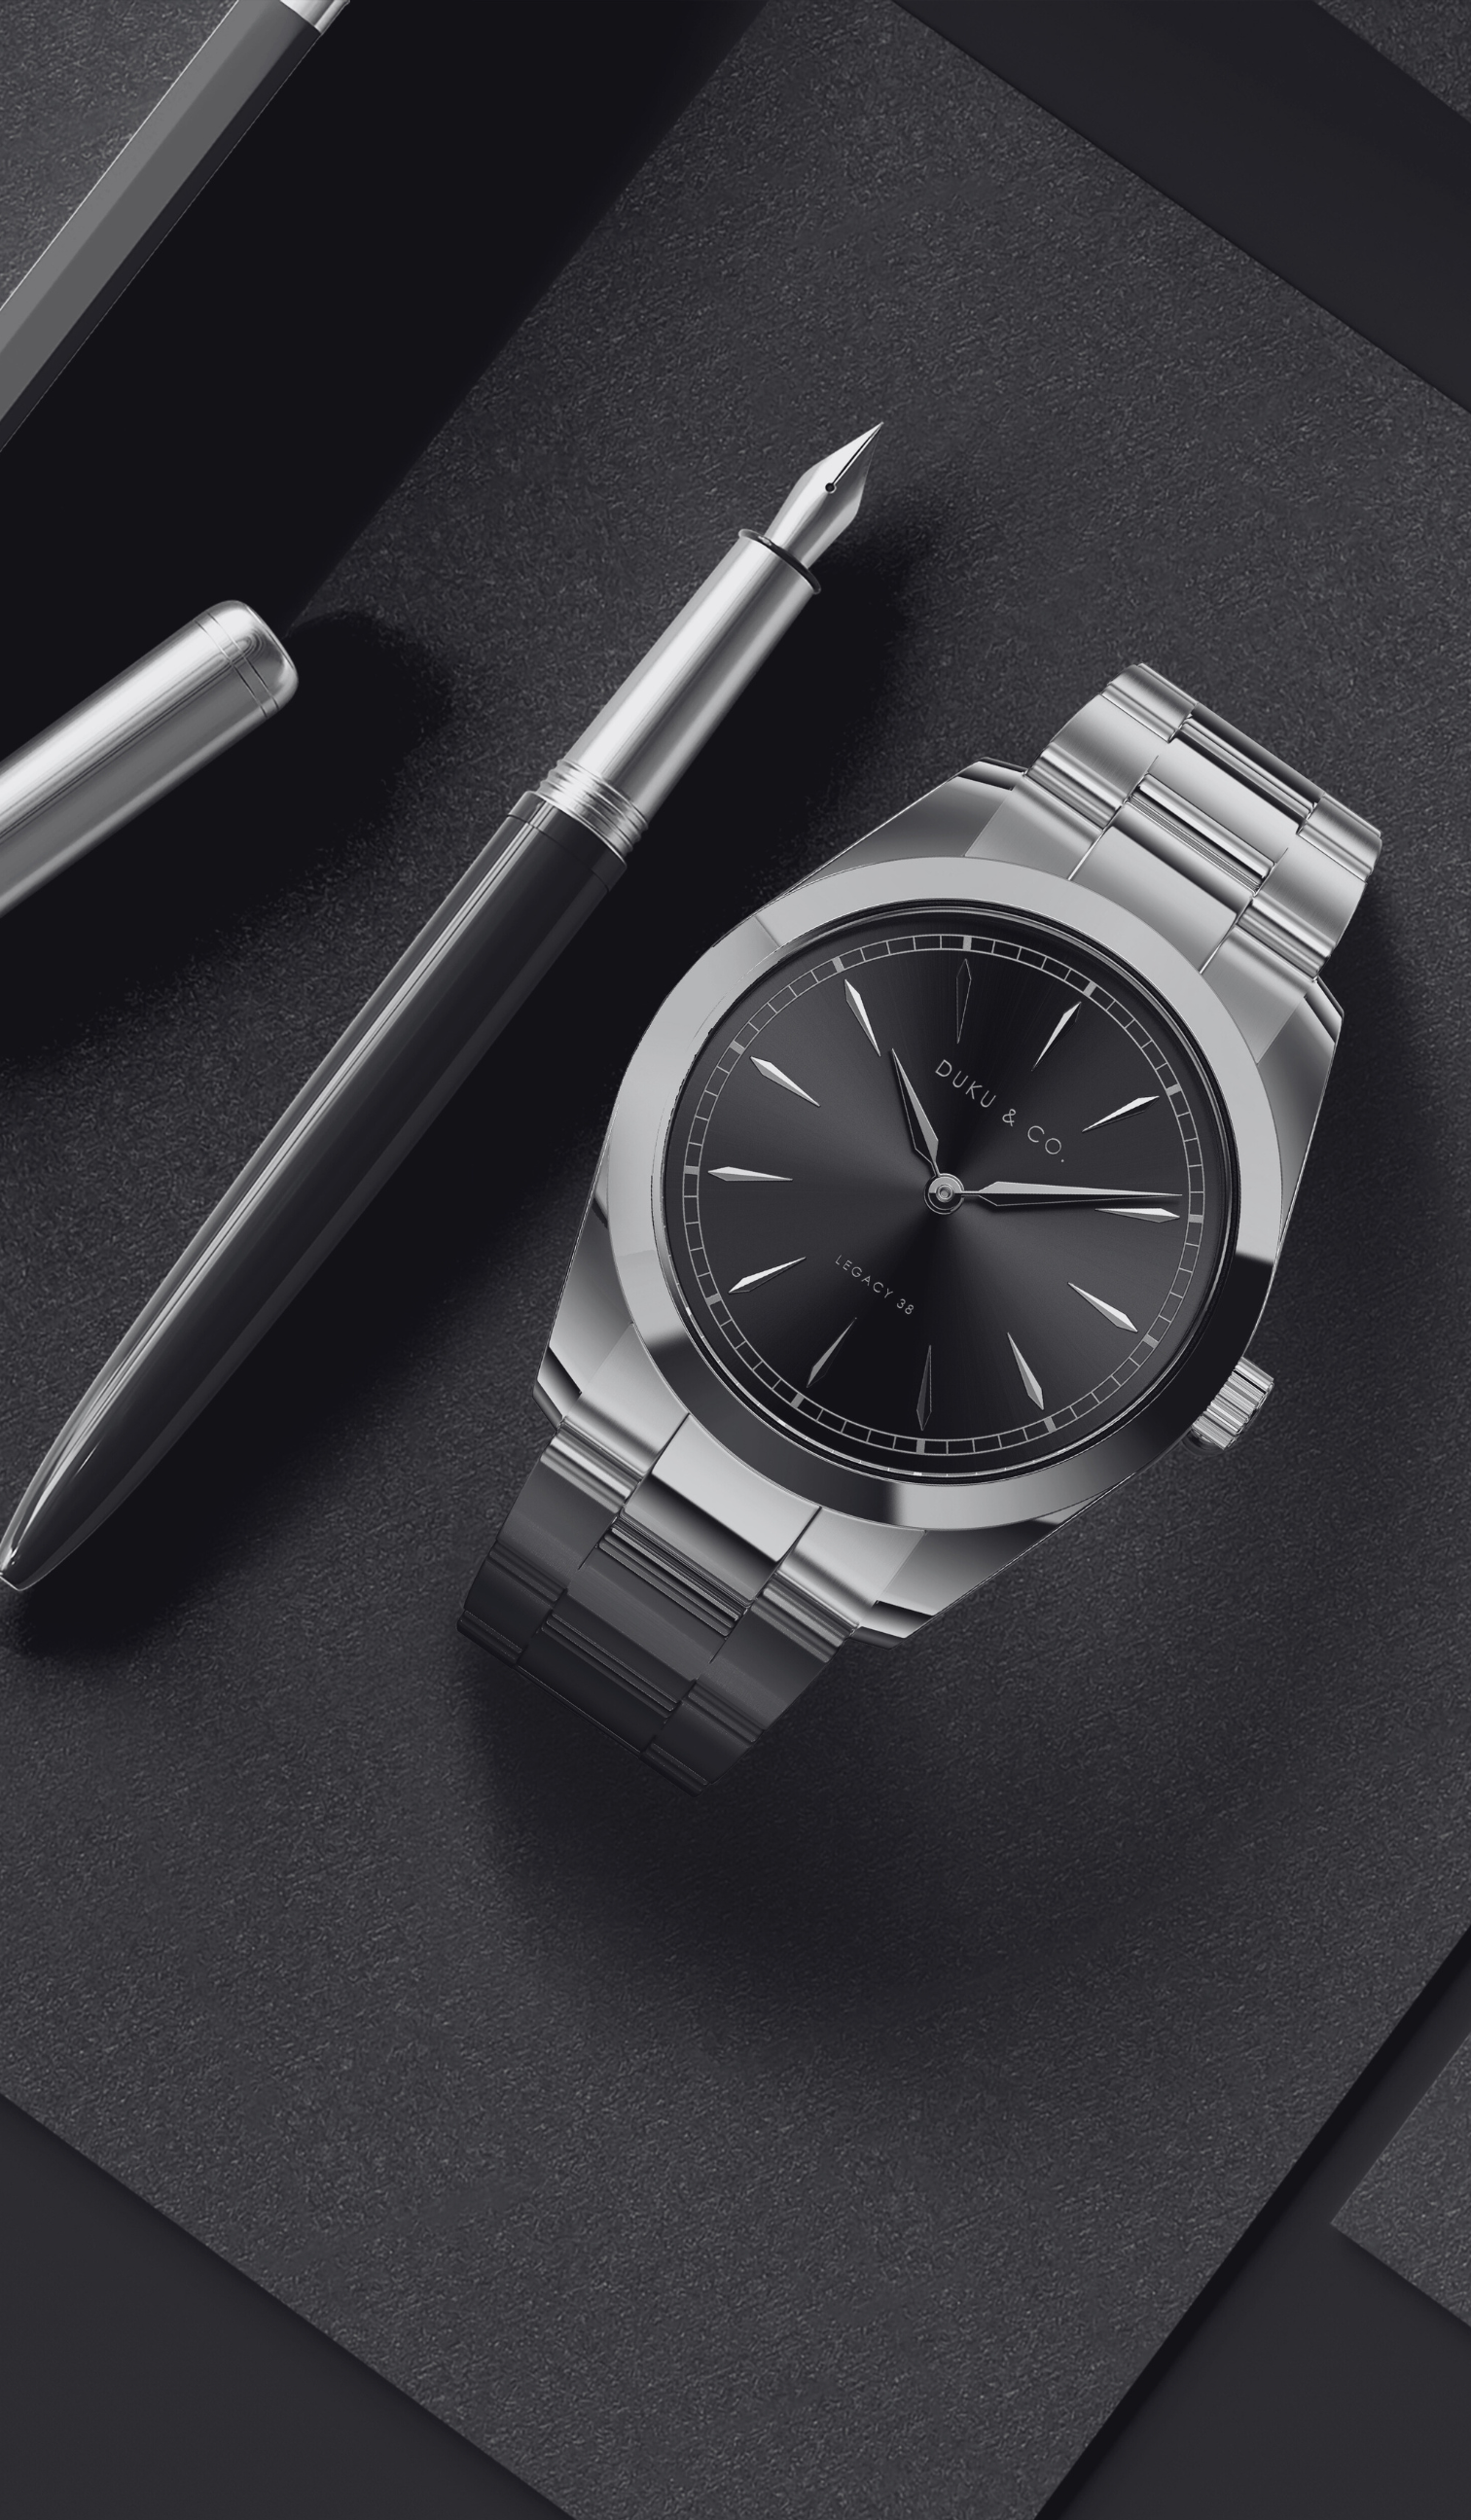 Pen and Stainless steel watch from Duku & Co.